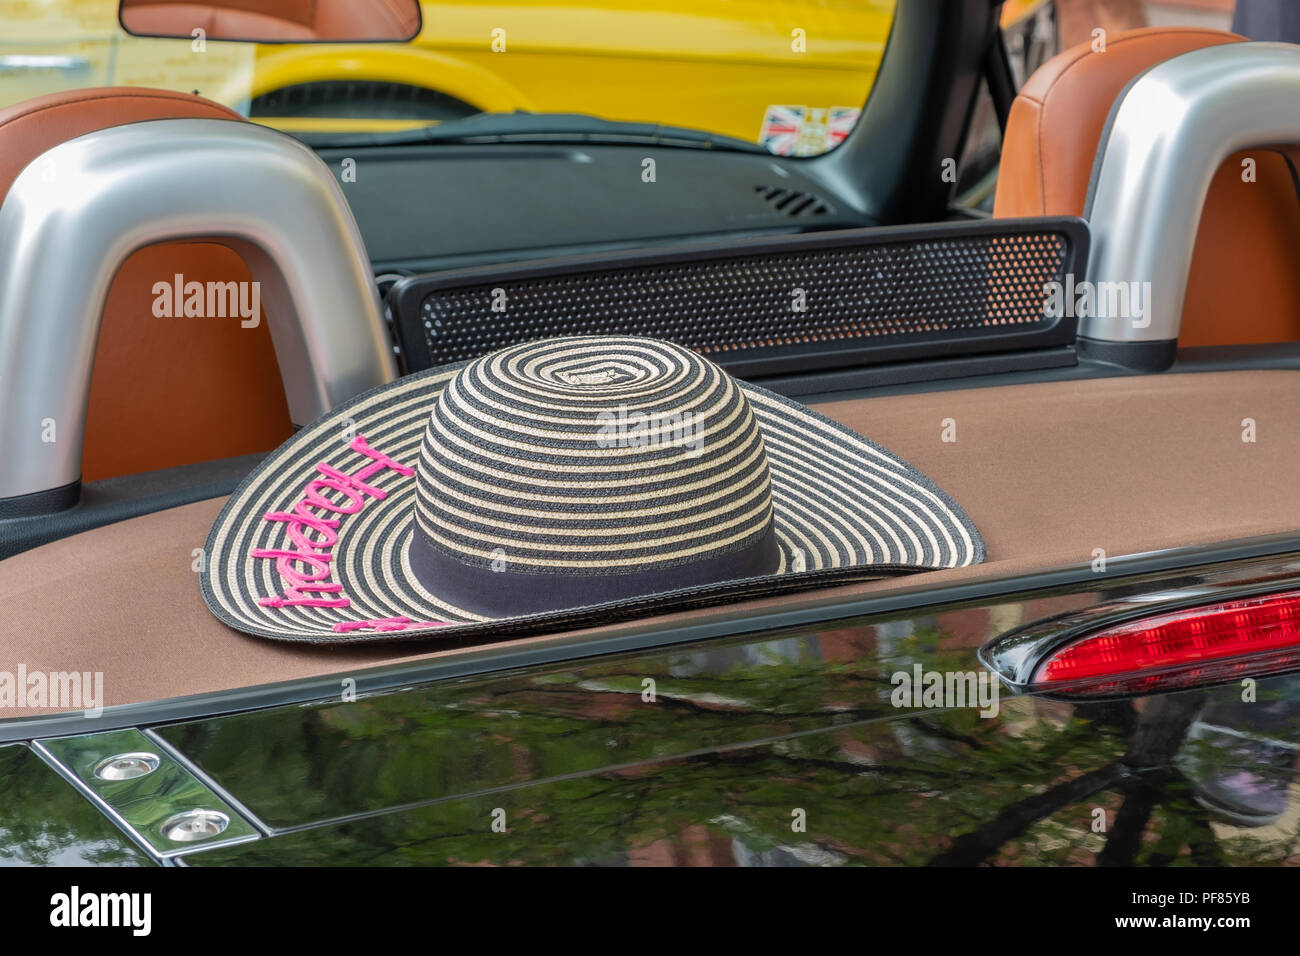 Straw hat sitting on the back deck of a convertible.  Can be used mutiple ways to convey a concept such as travel, lifestyle, leisure, and retirement. Stock Photo